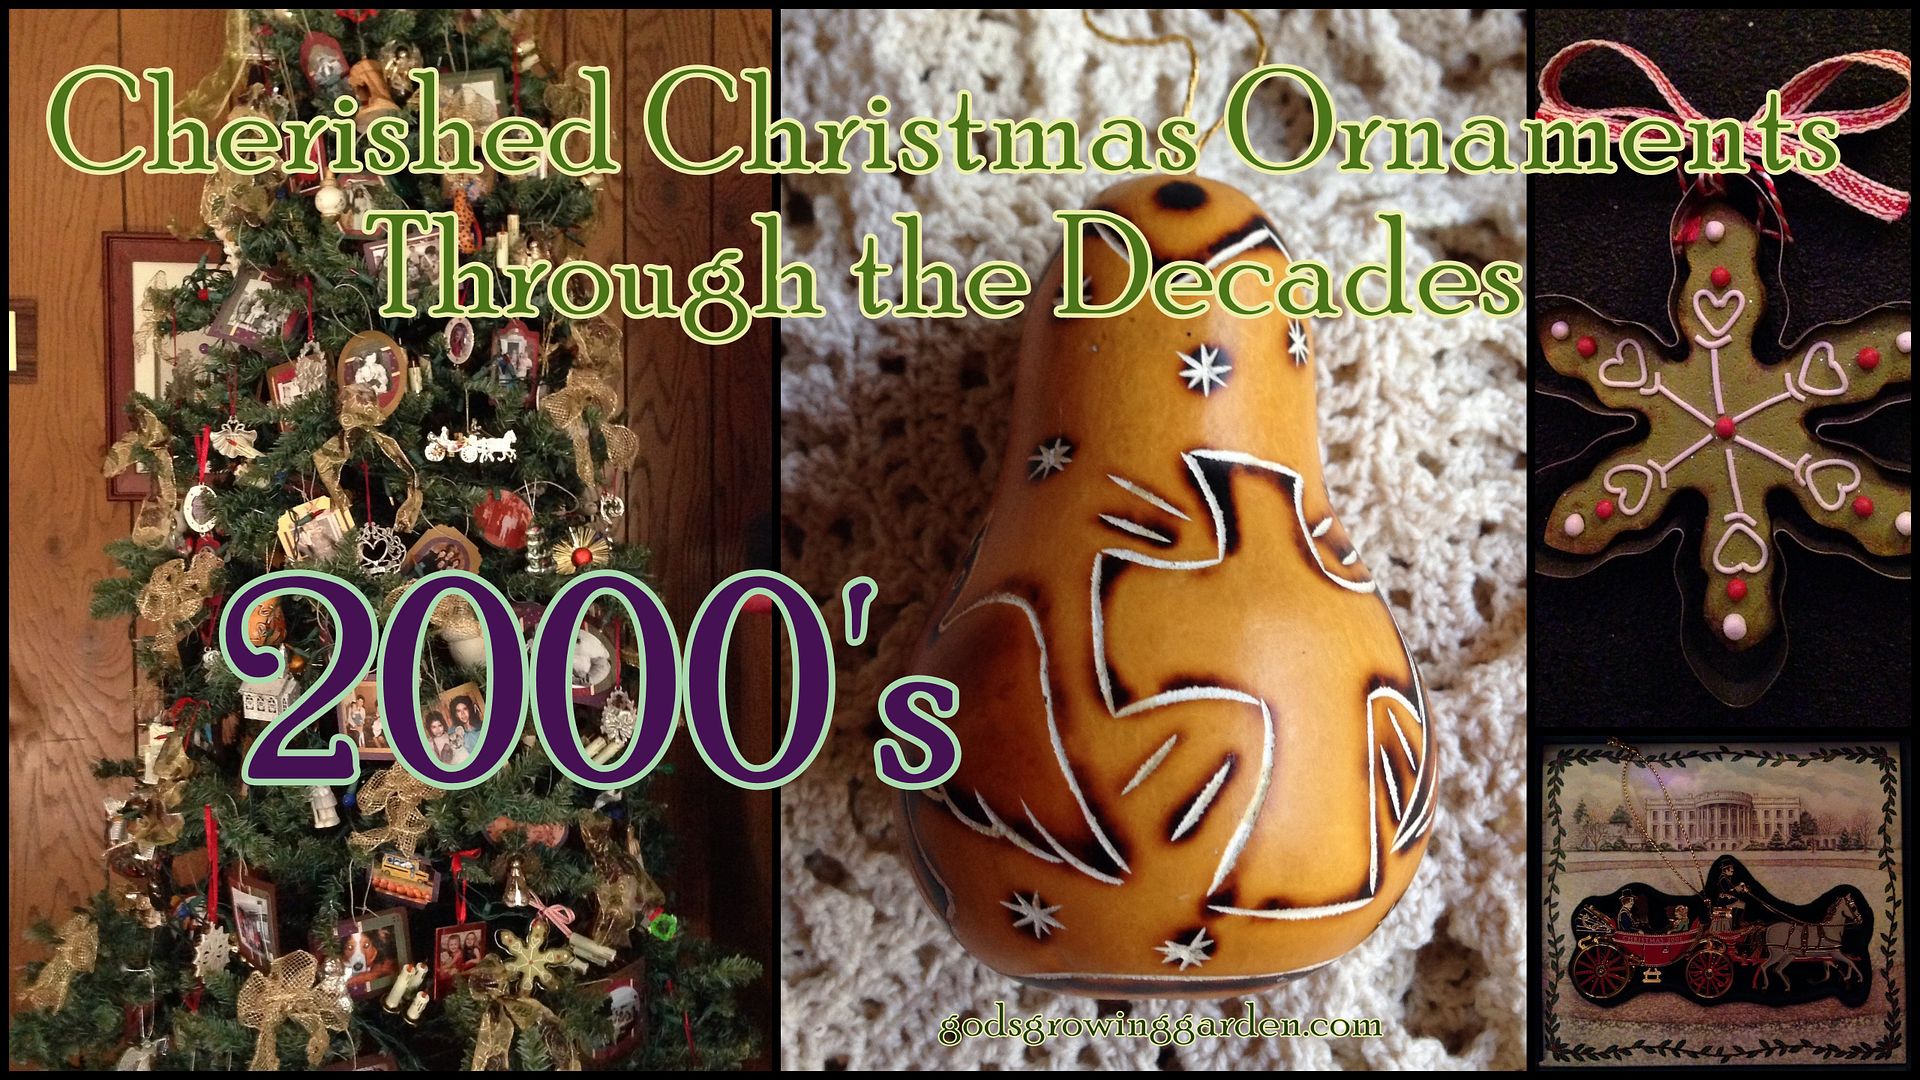 by Angie Ouellette-Tower for http://www.godsgrowinggarden.com/ photo Ornaments-004_zpstulm7m9o.jpg